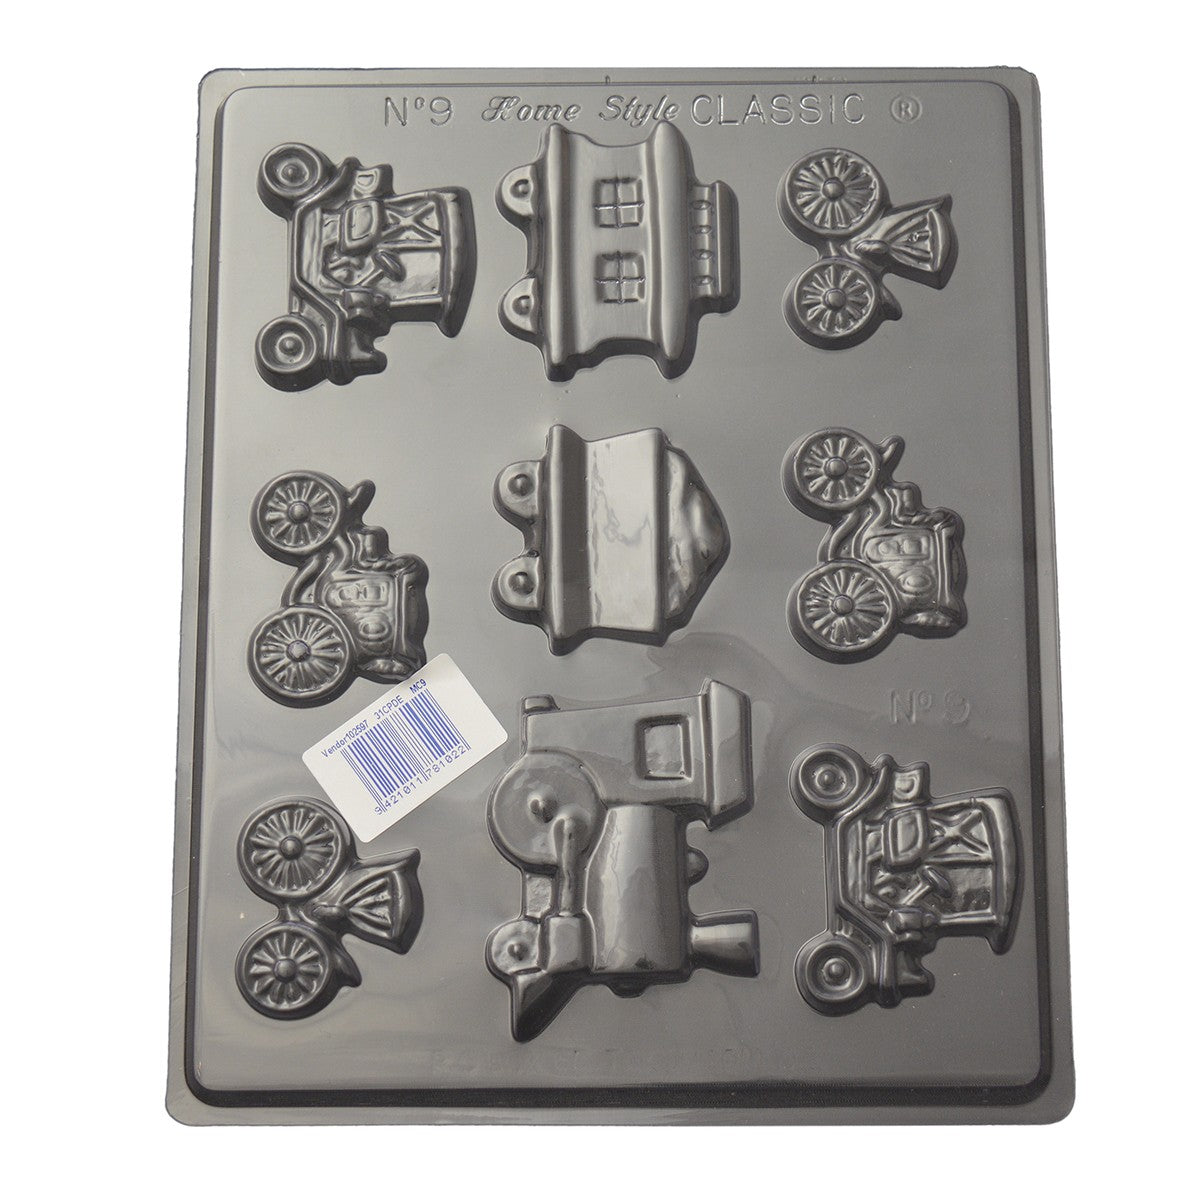 Vintage cars and Trains chocolate mould